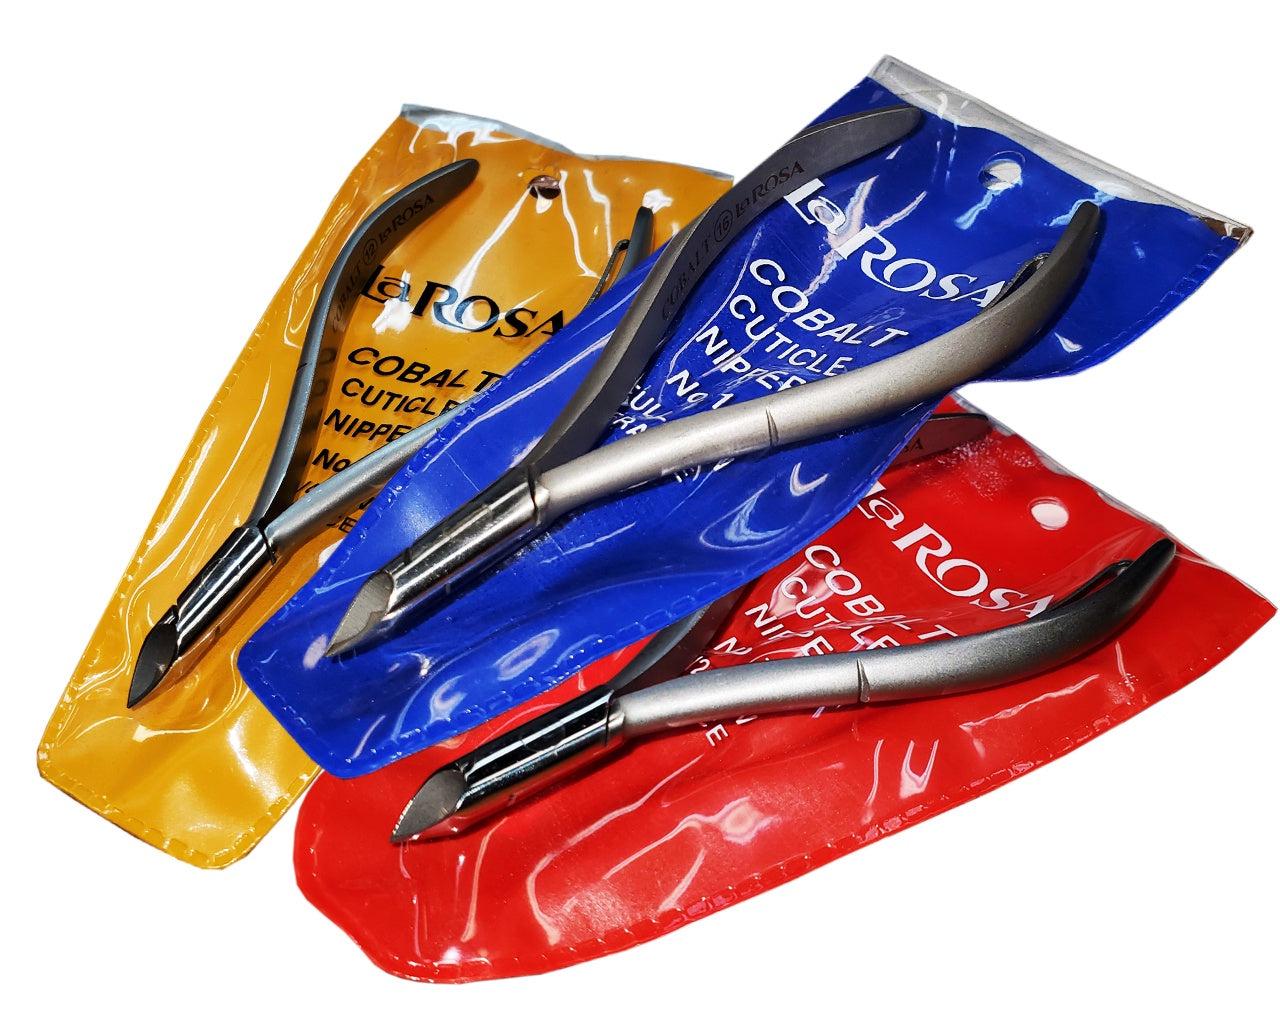 PS Star Cuticle Nippers Cobalt Pro 790P Pro.